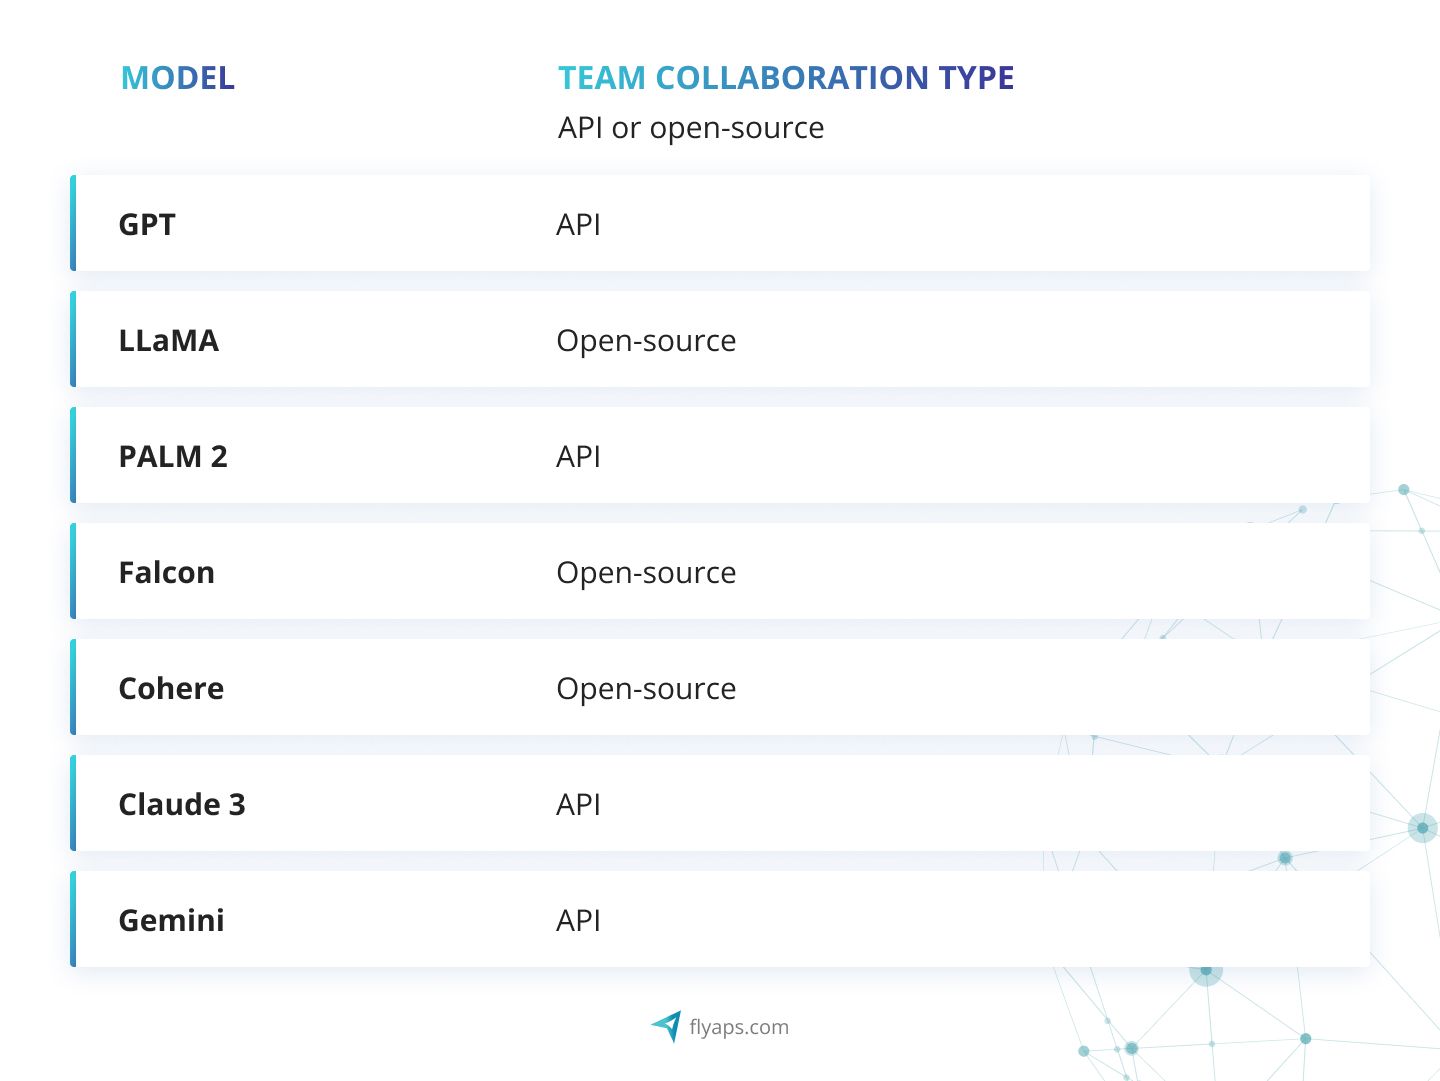 Team collaboration type (API or open-source)